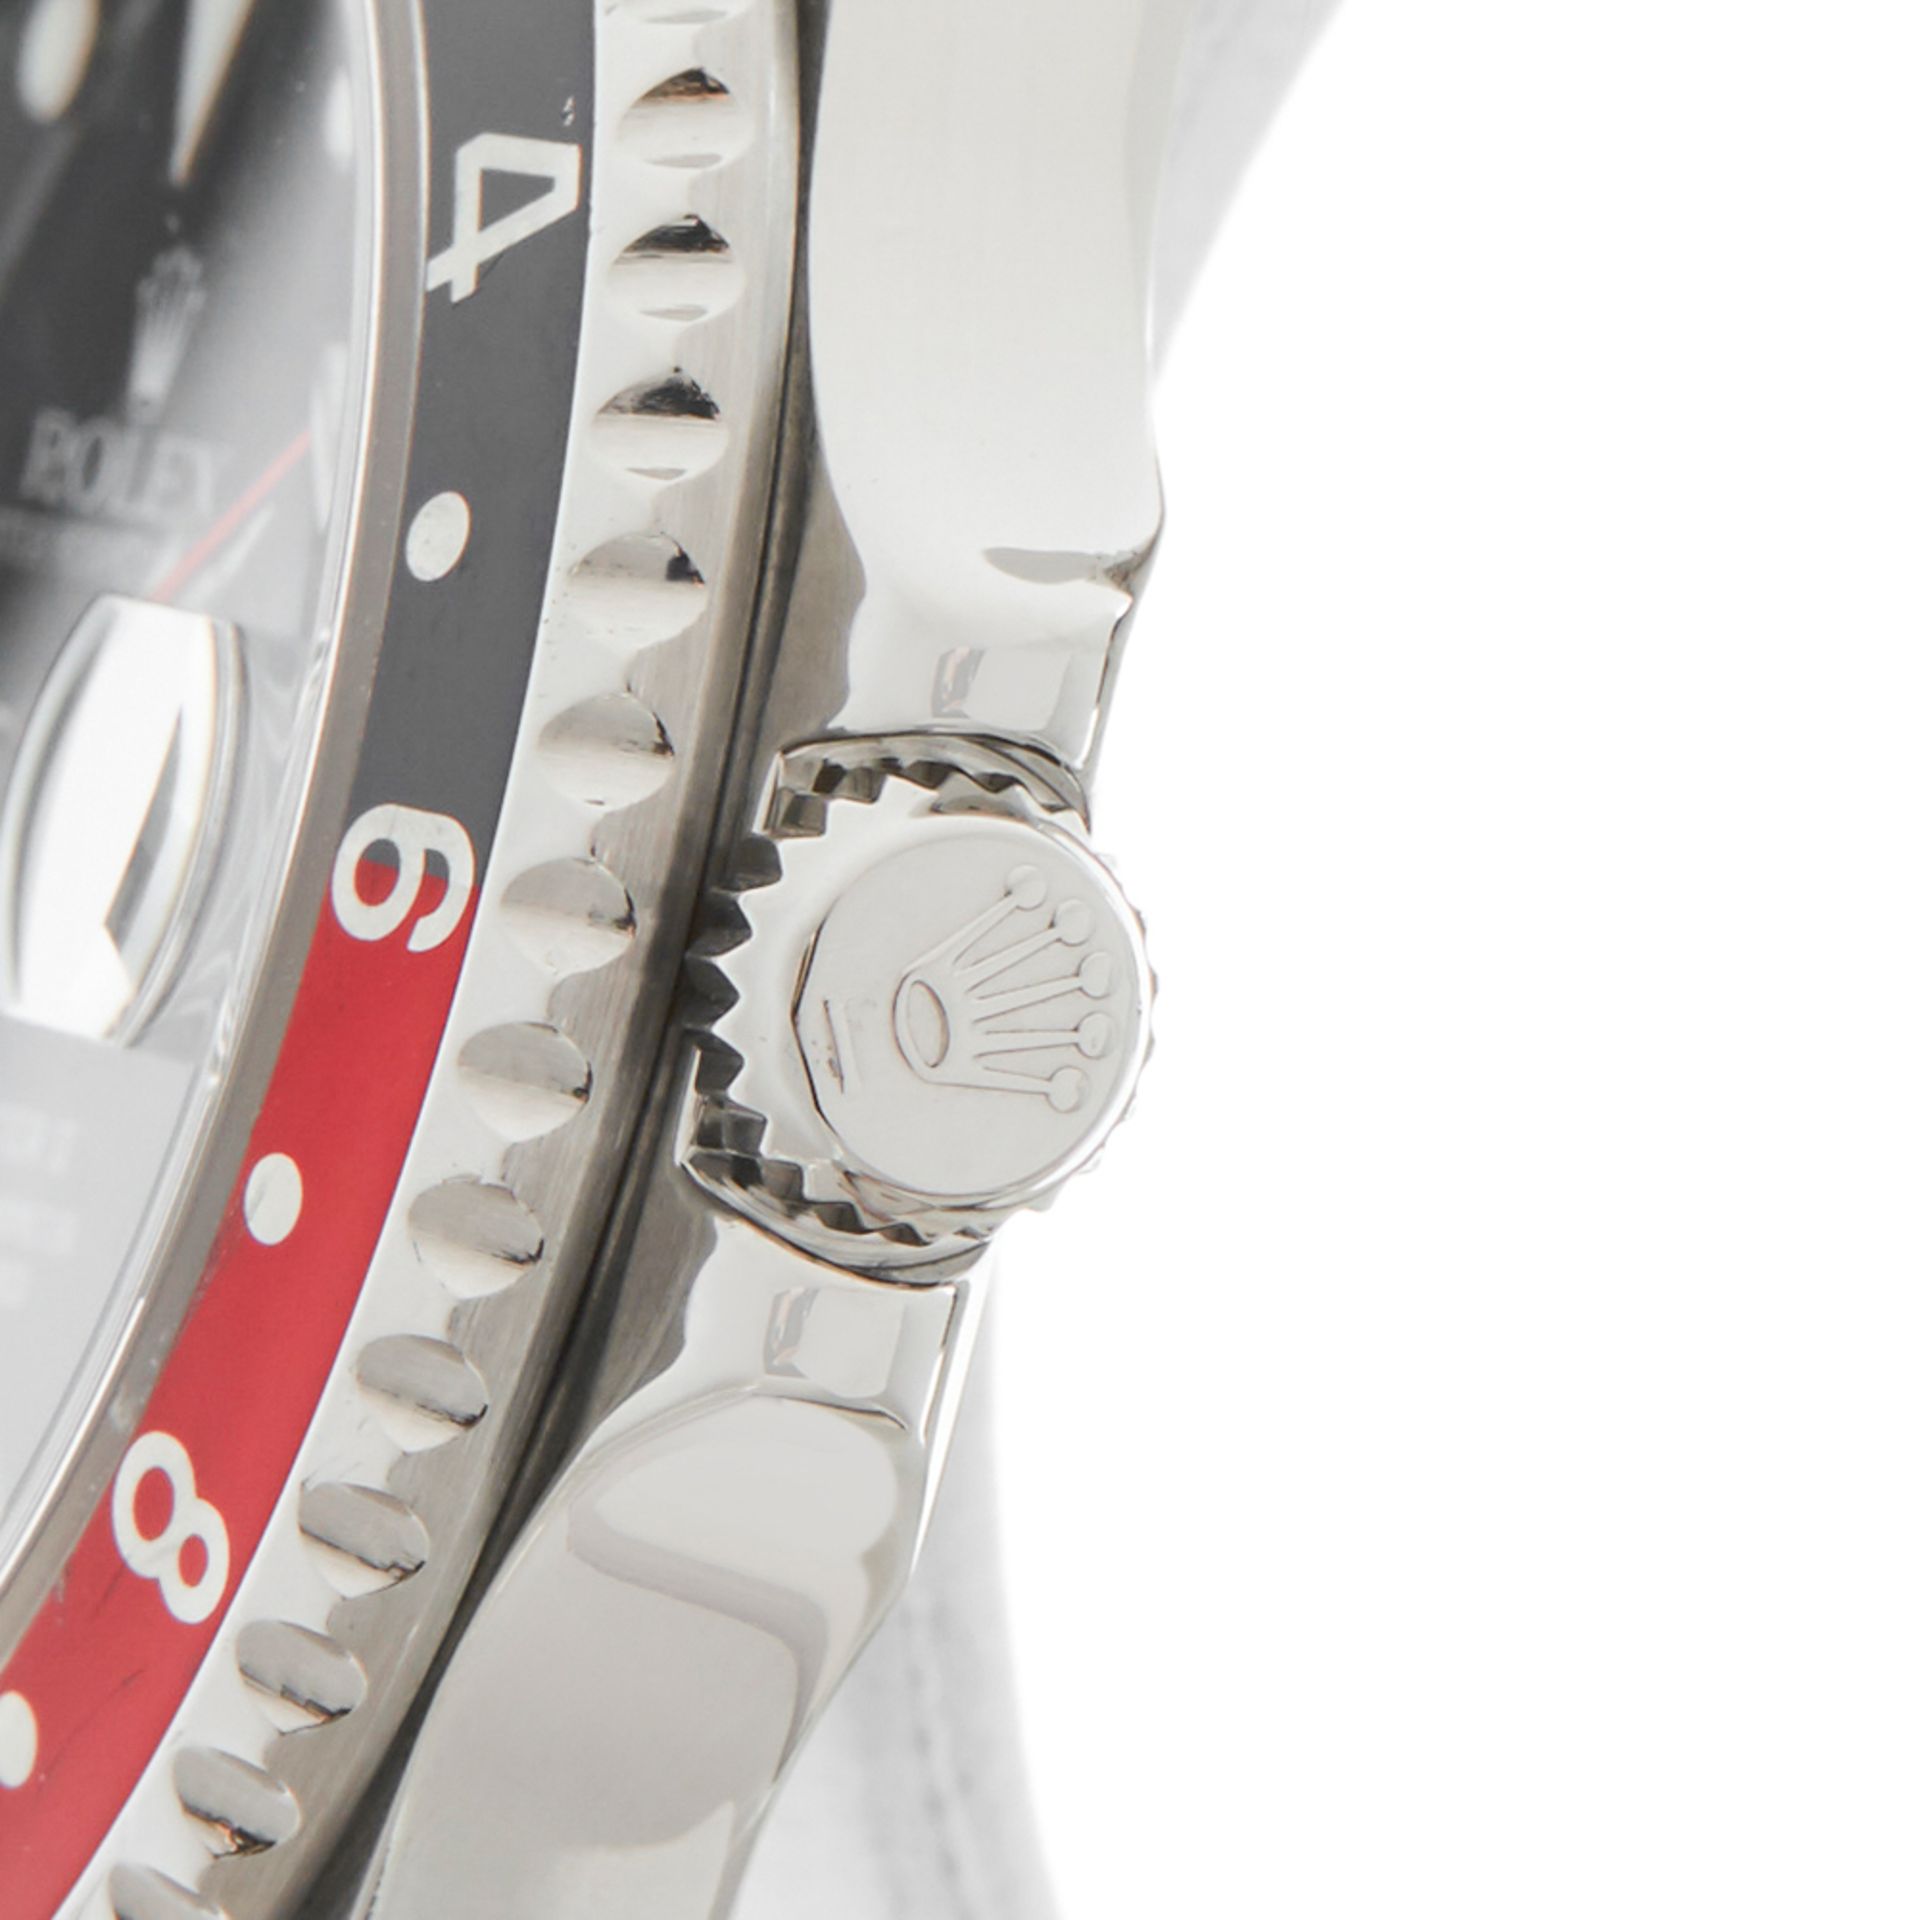 Rolex GMT-Master II Coke 40mm Stainless Steel 16710 - Image 4 of 8